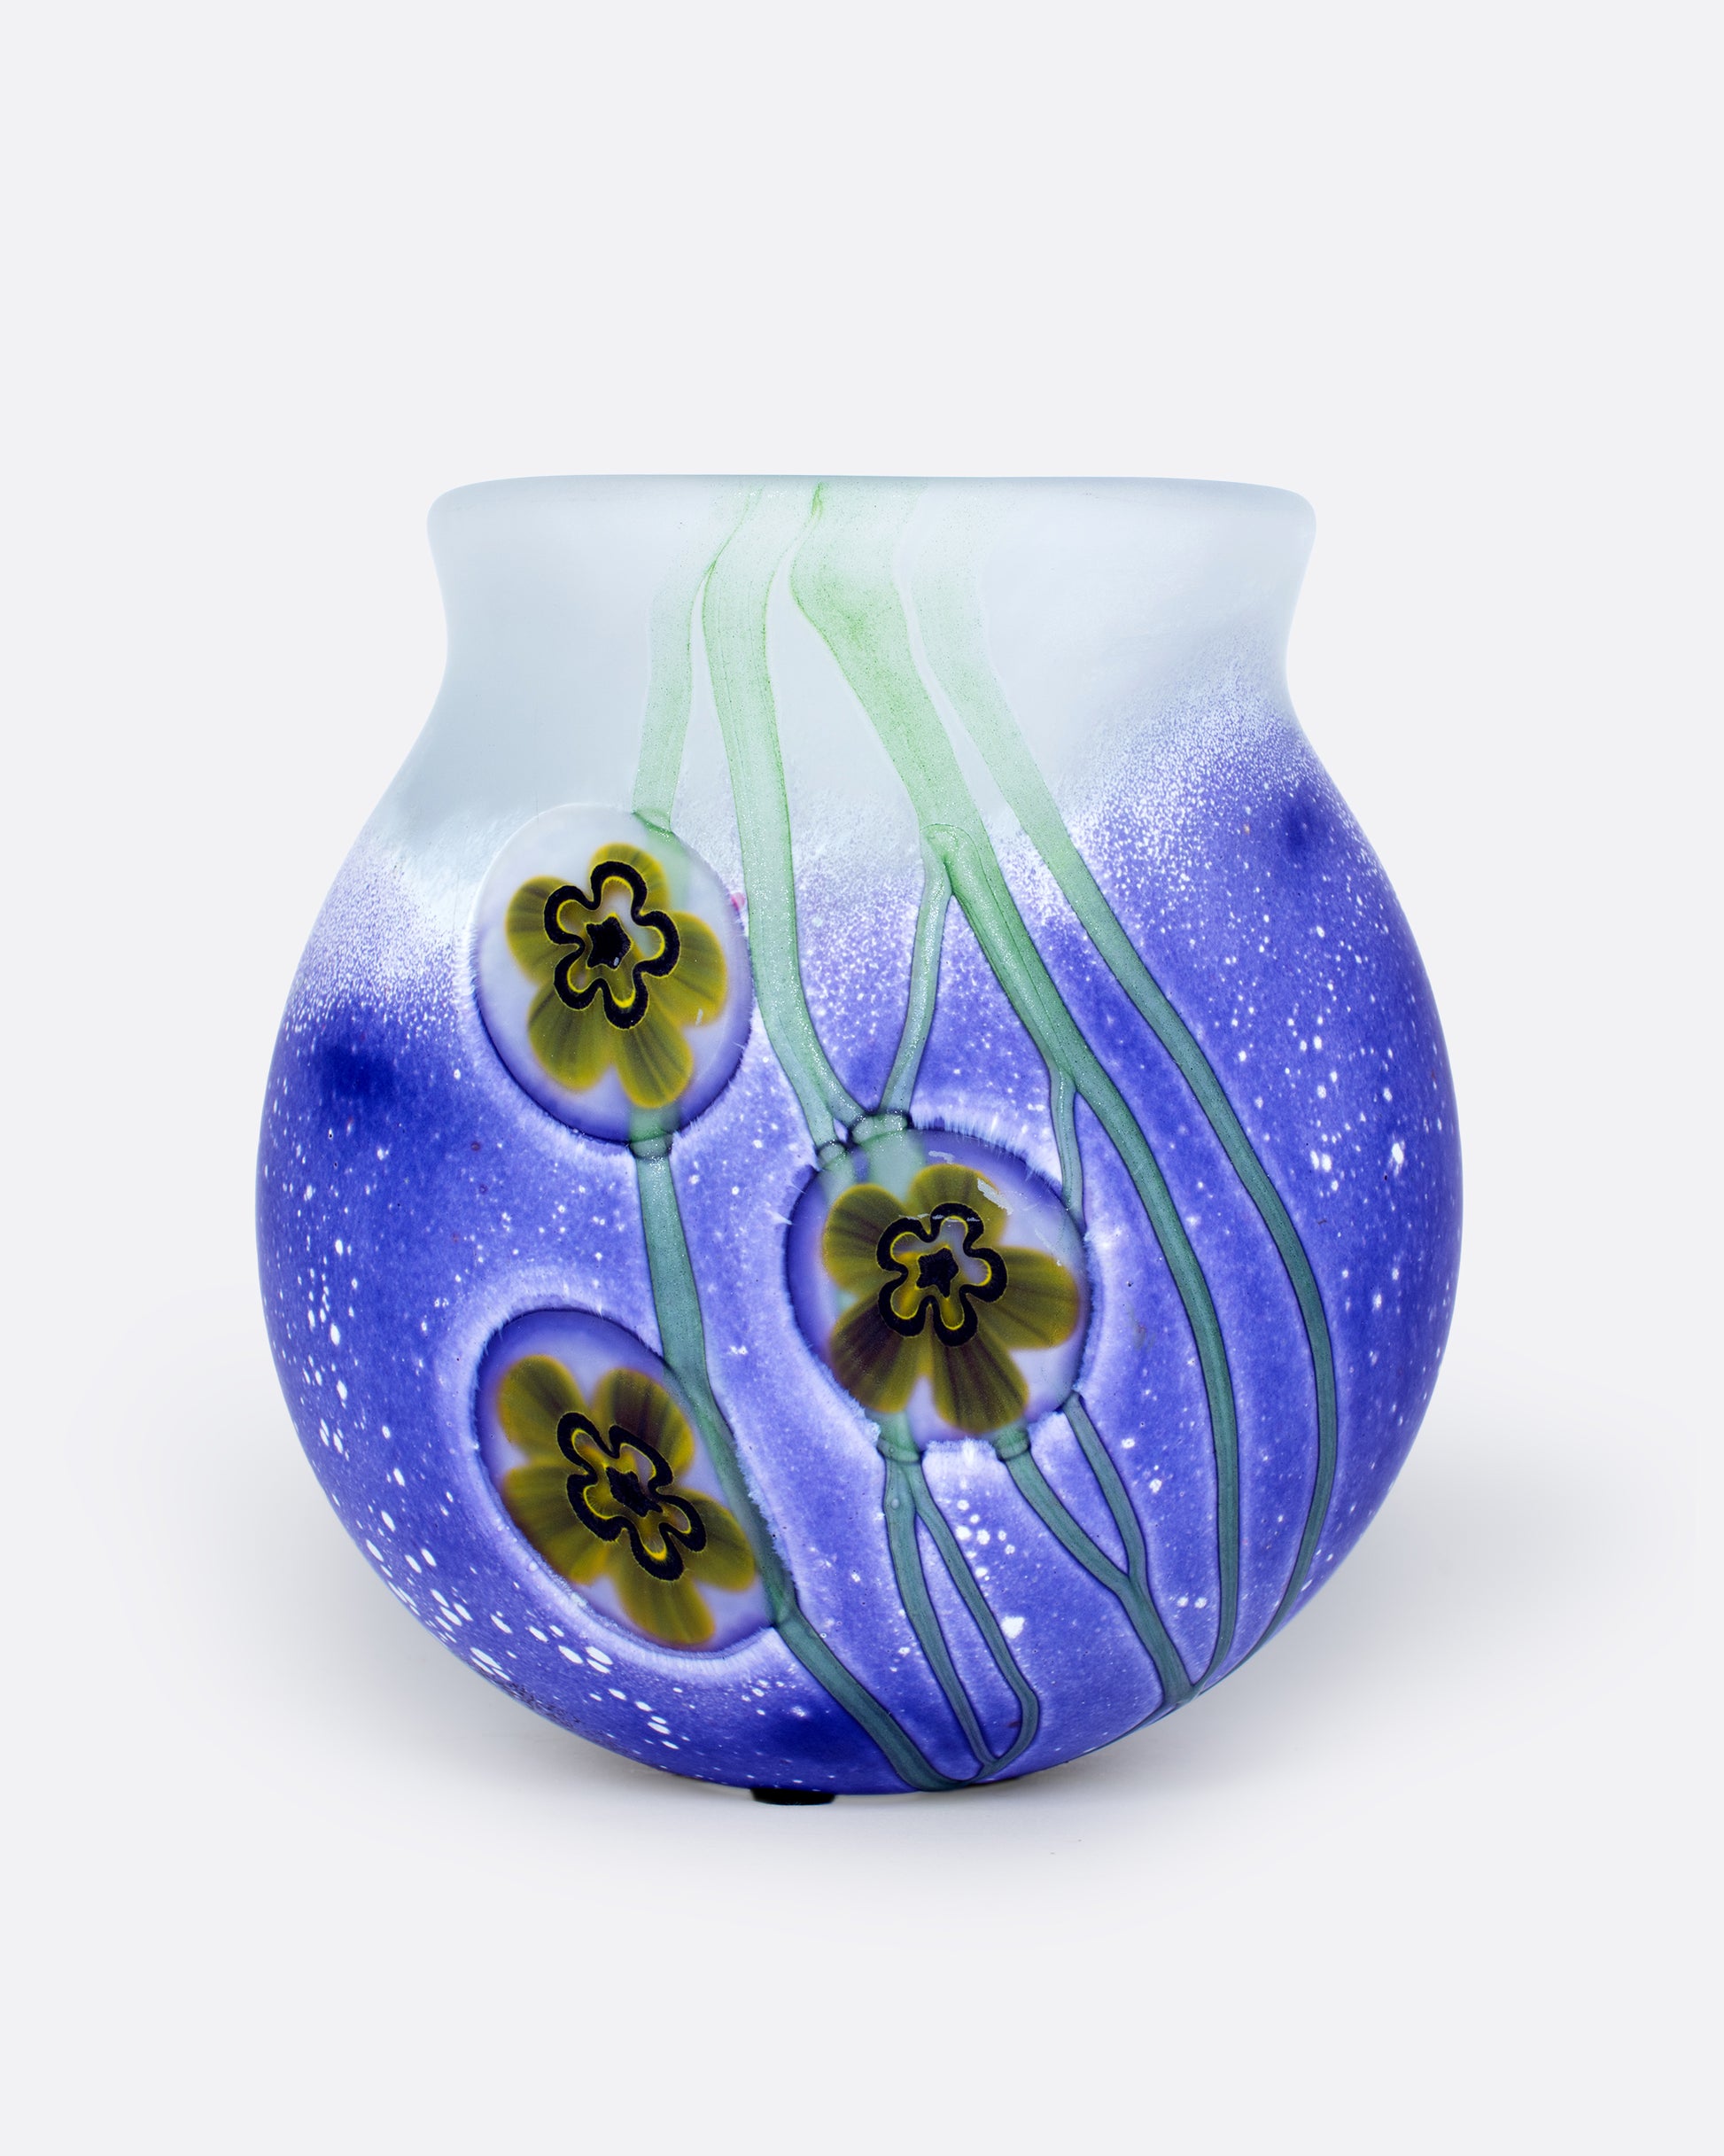 This heavy, frosted glass vase is mesmerizing from every angle.